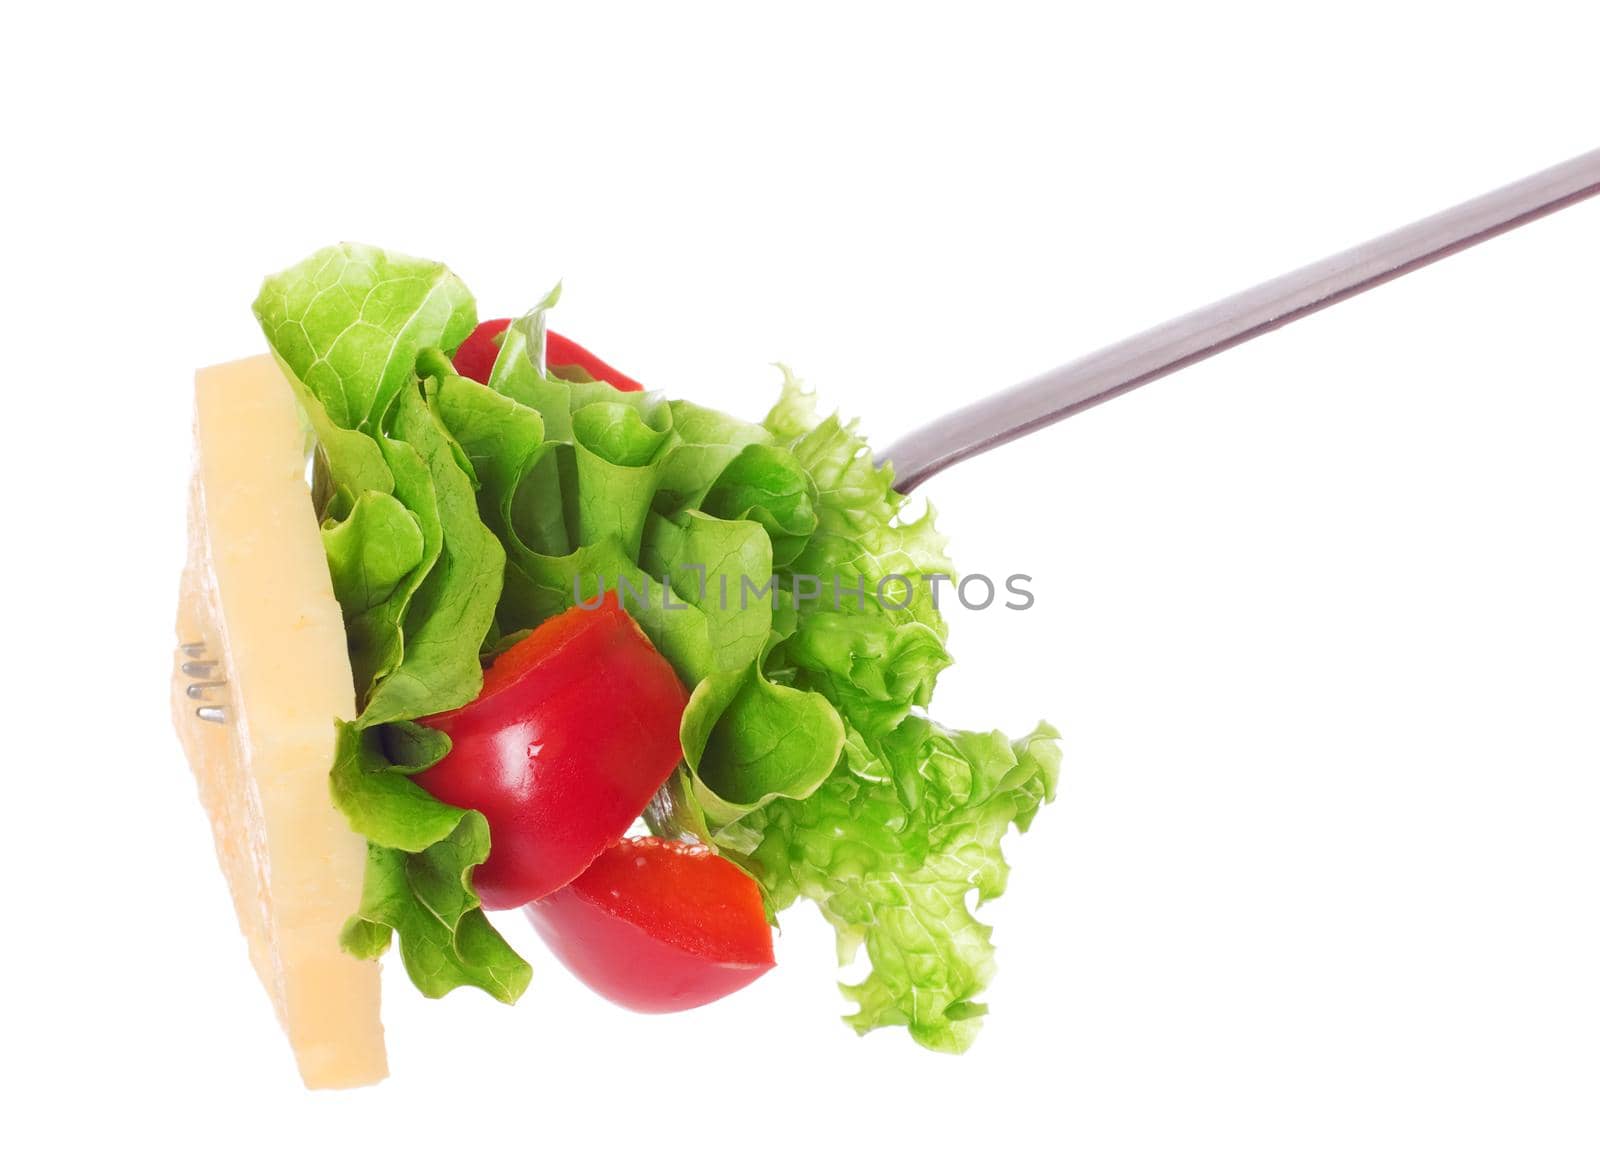 Salad on fork isolated on white.